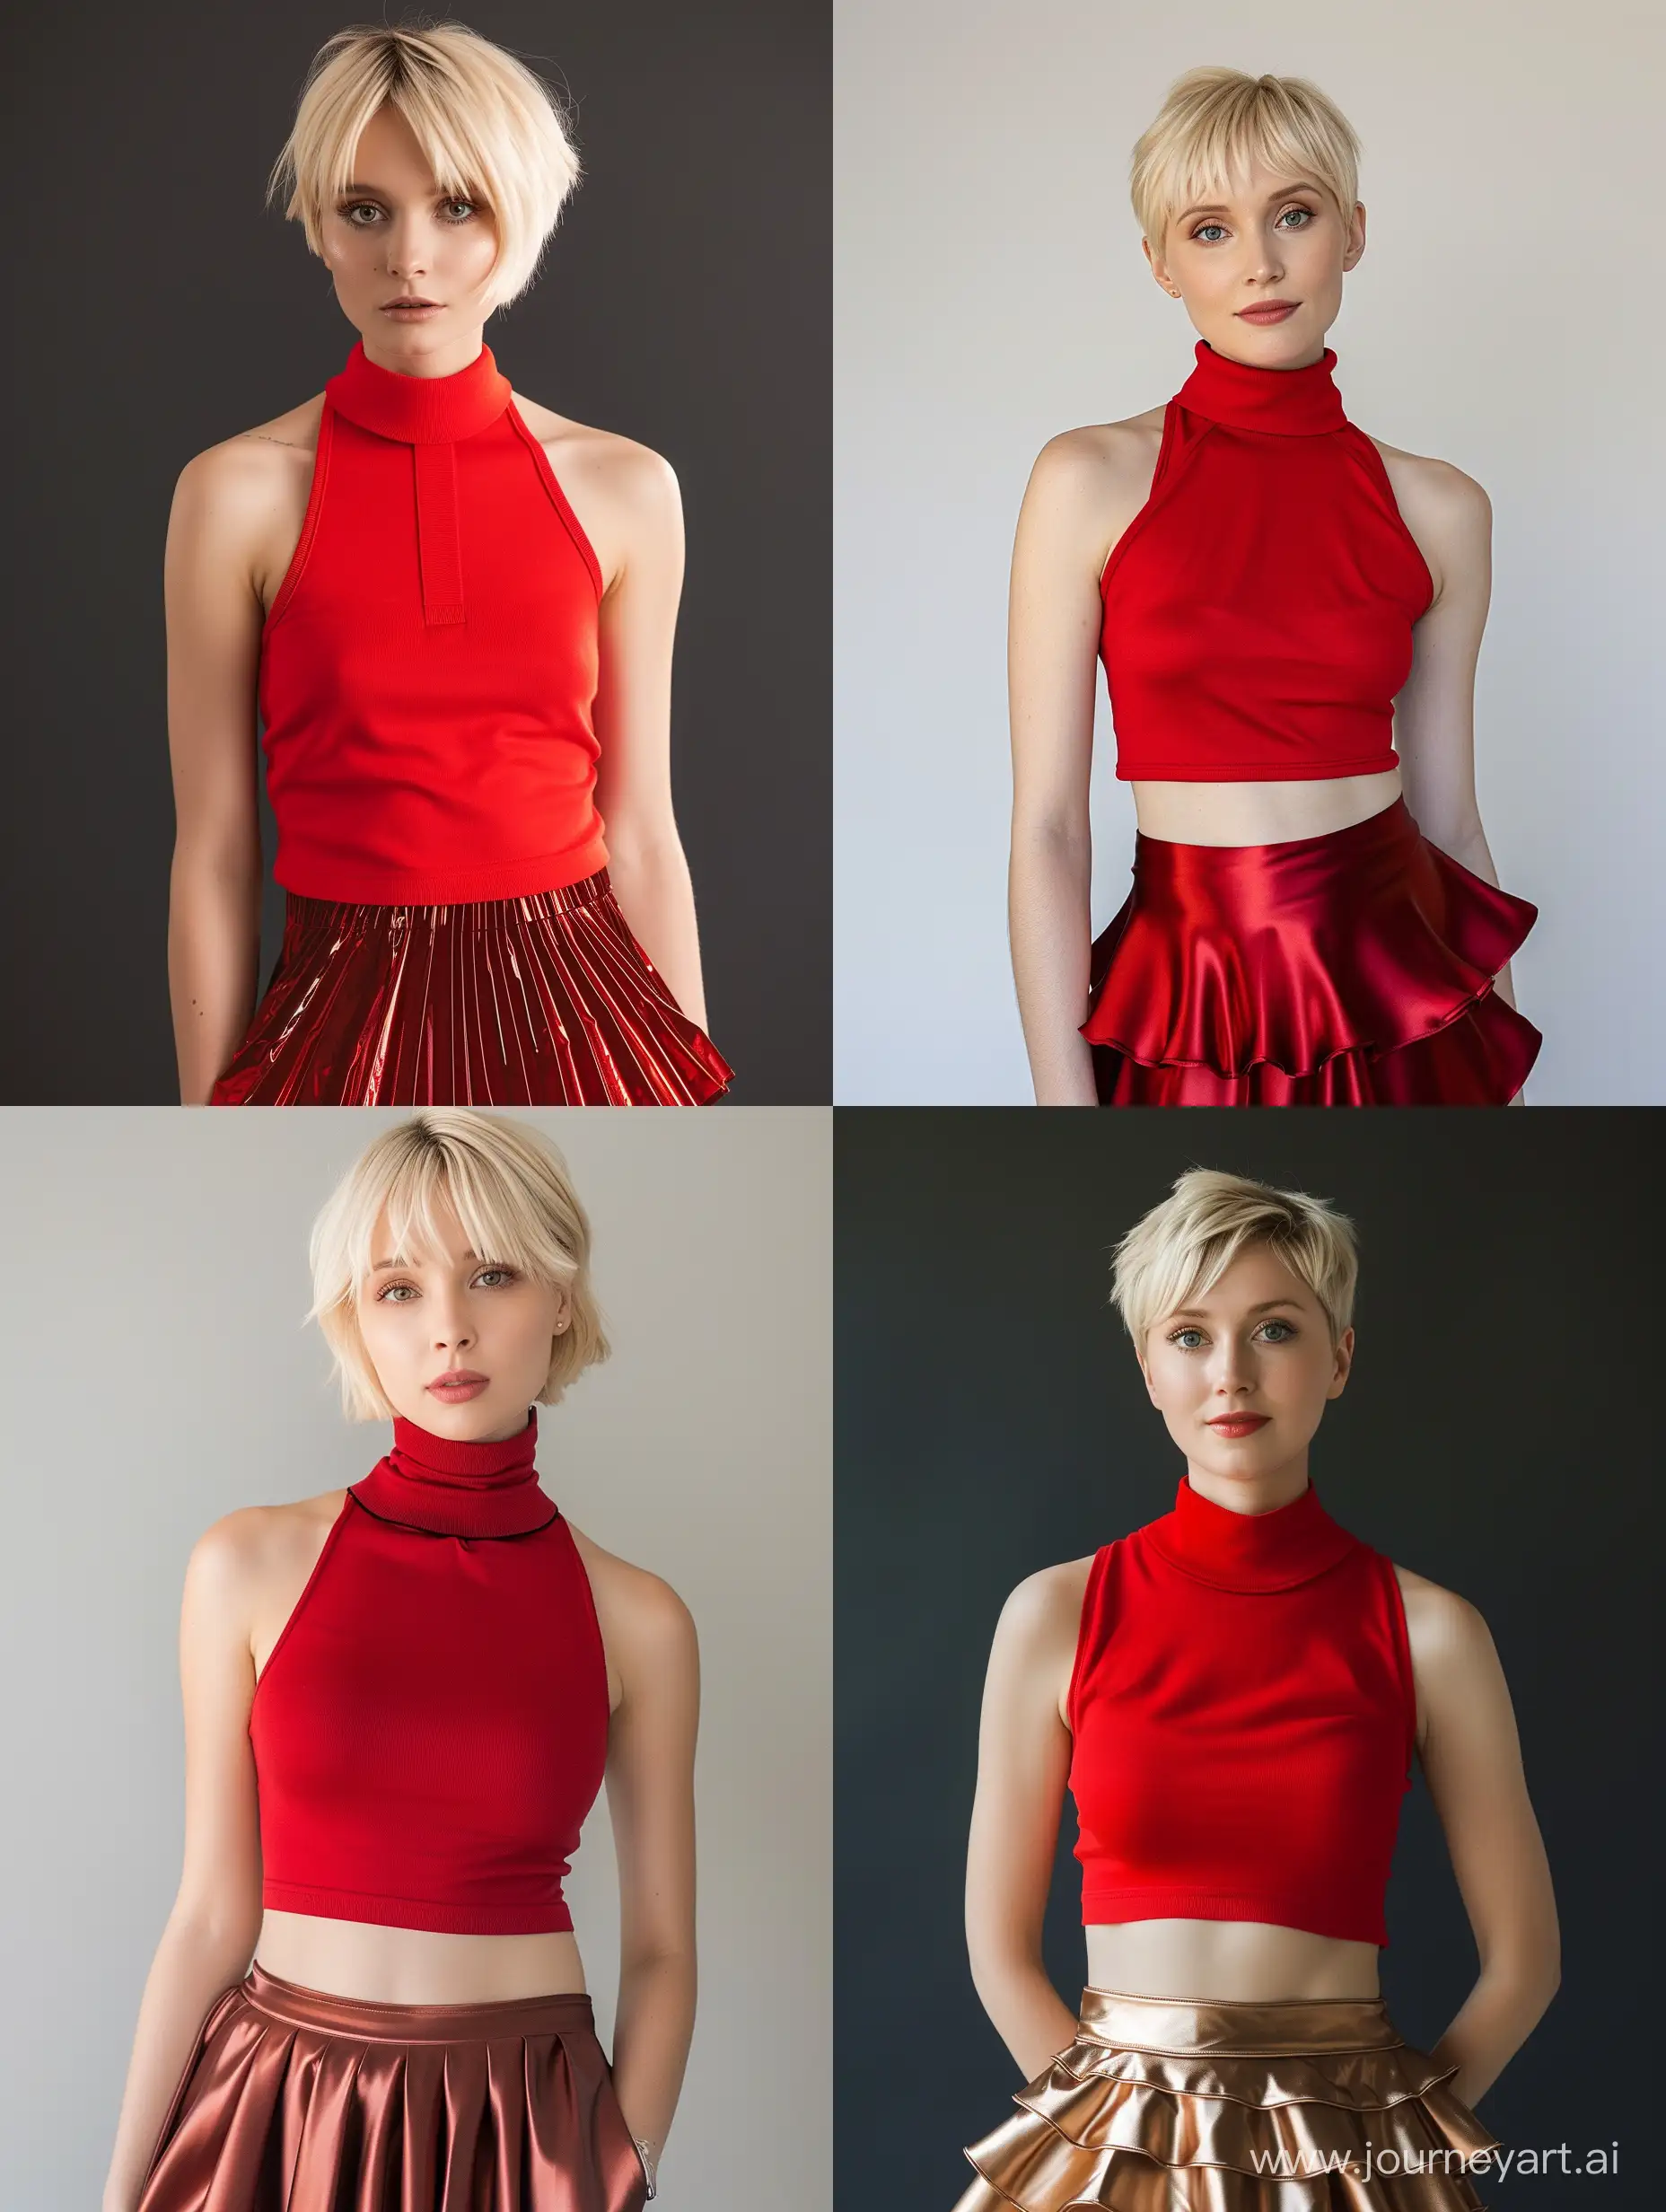 Fashionforward-Blond-Woman-in-Red-Halter-Polo-Neck-and-Satin-Layered-Mini-Skirt